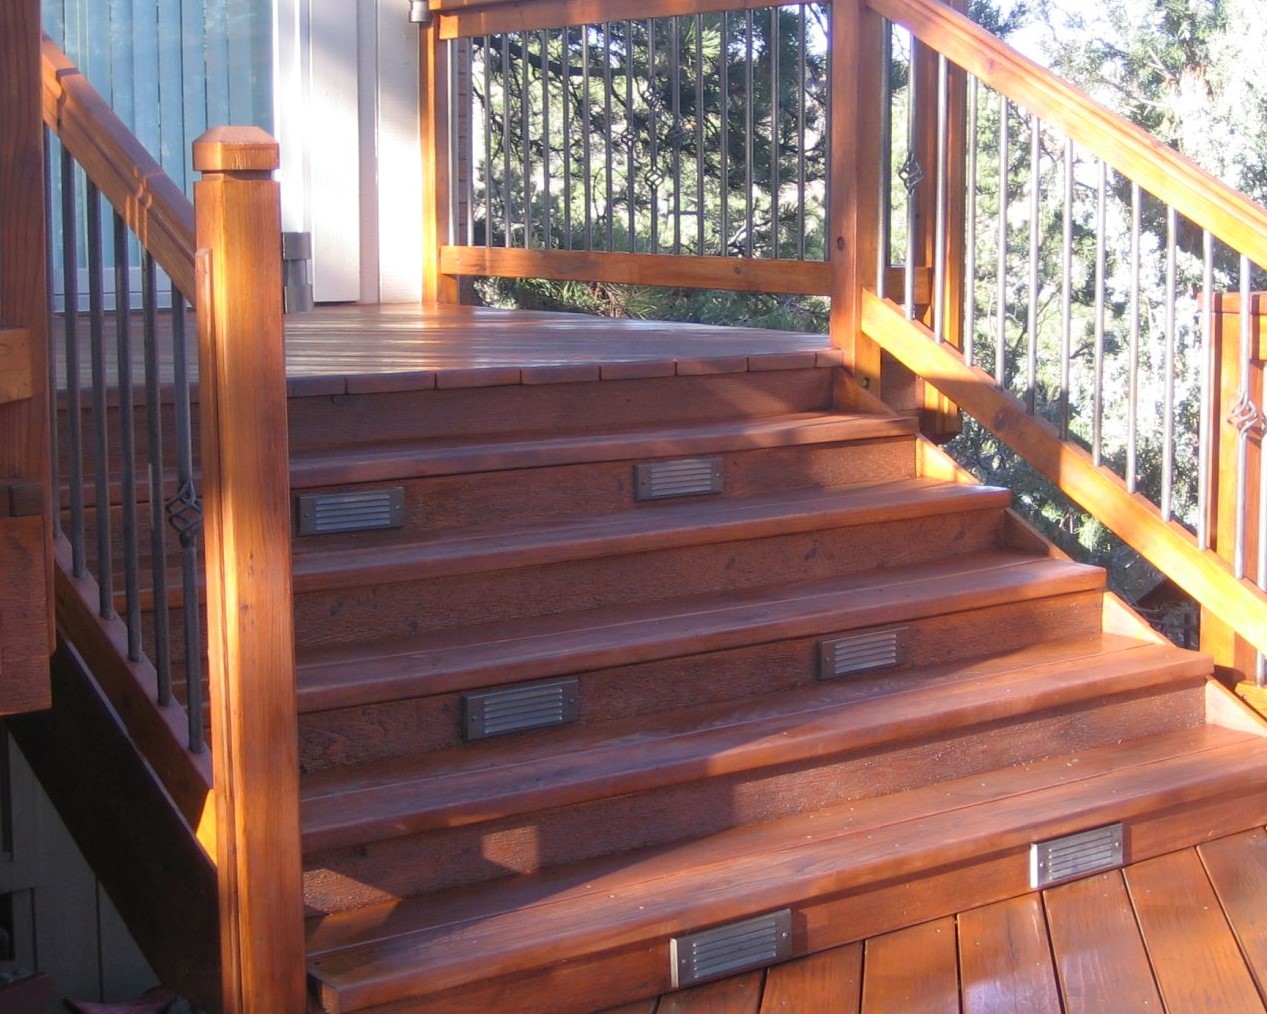 6' wide redwood deck stairs with two Yellow Stone brick lights installed on every other stair riser.